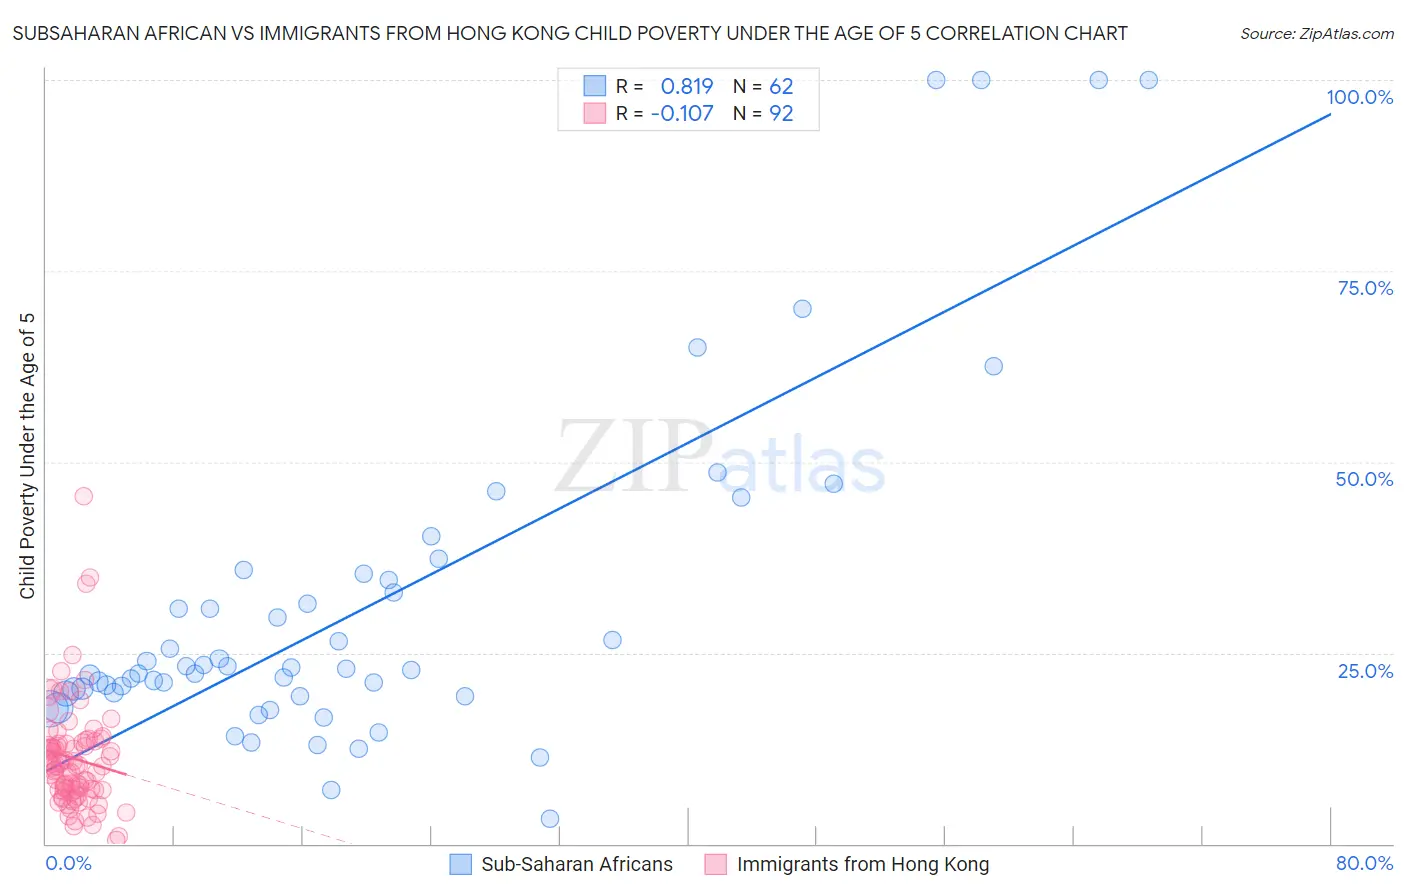 Subsaharan African vs Immigrants from Hong Kong Child Poverty Under the Age of 5